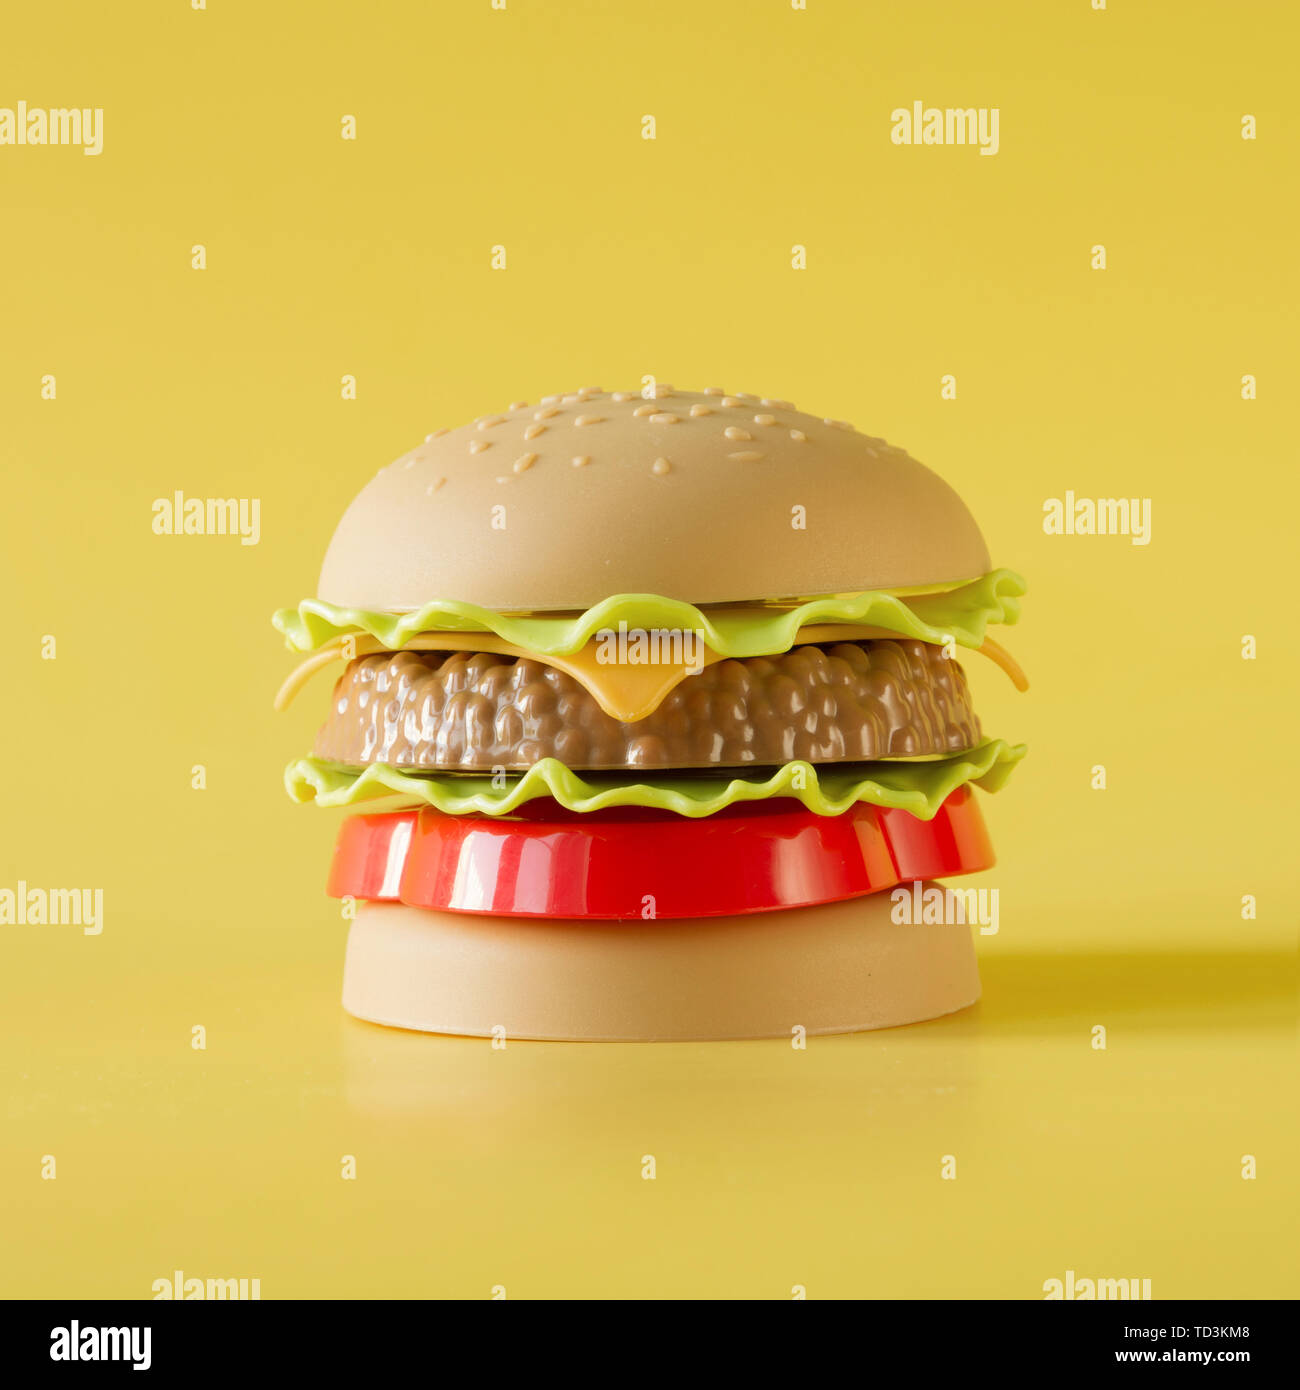 Download Plastic Burger Salad Tomato Meat With On Yellow Concept Of Harmful Artificial Food Plastic Stock Photo Alamy Yellowimages Mockups